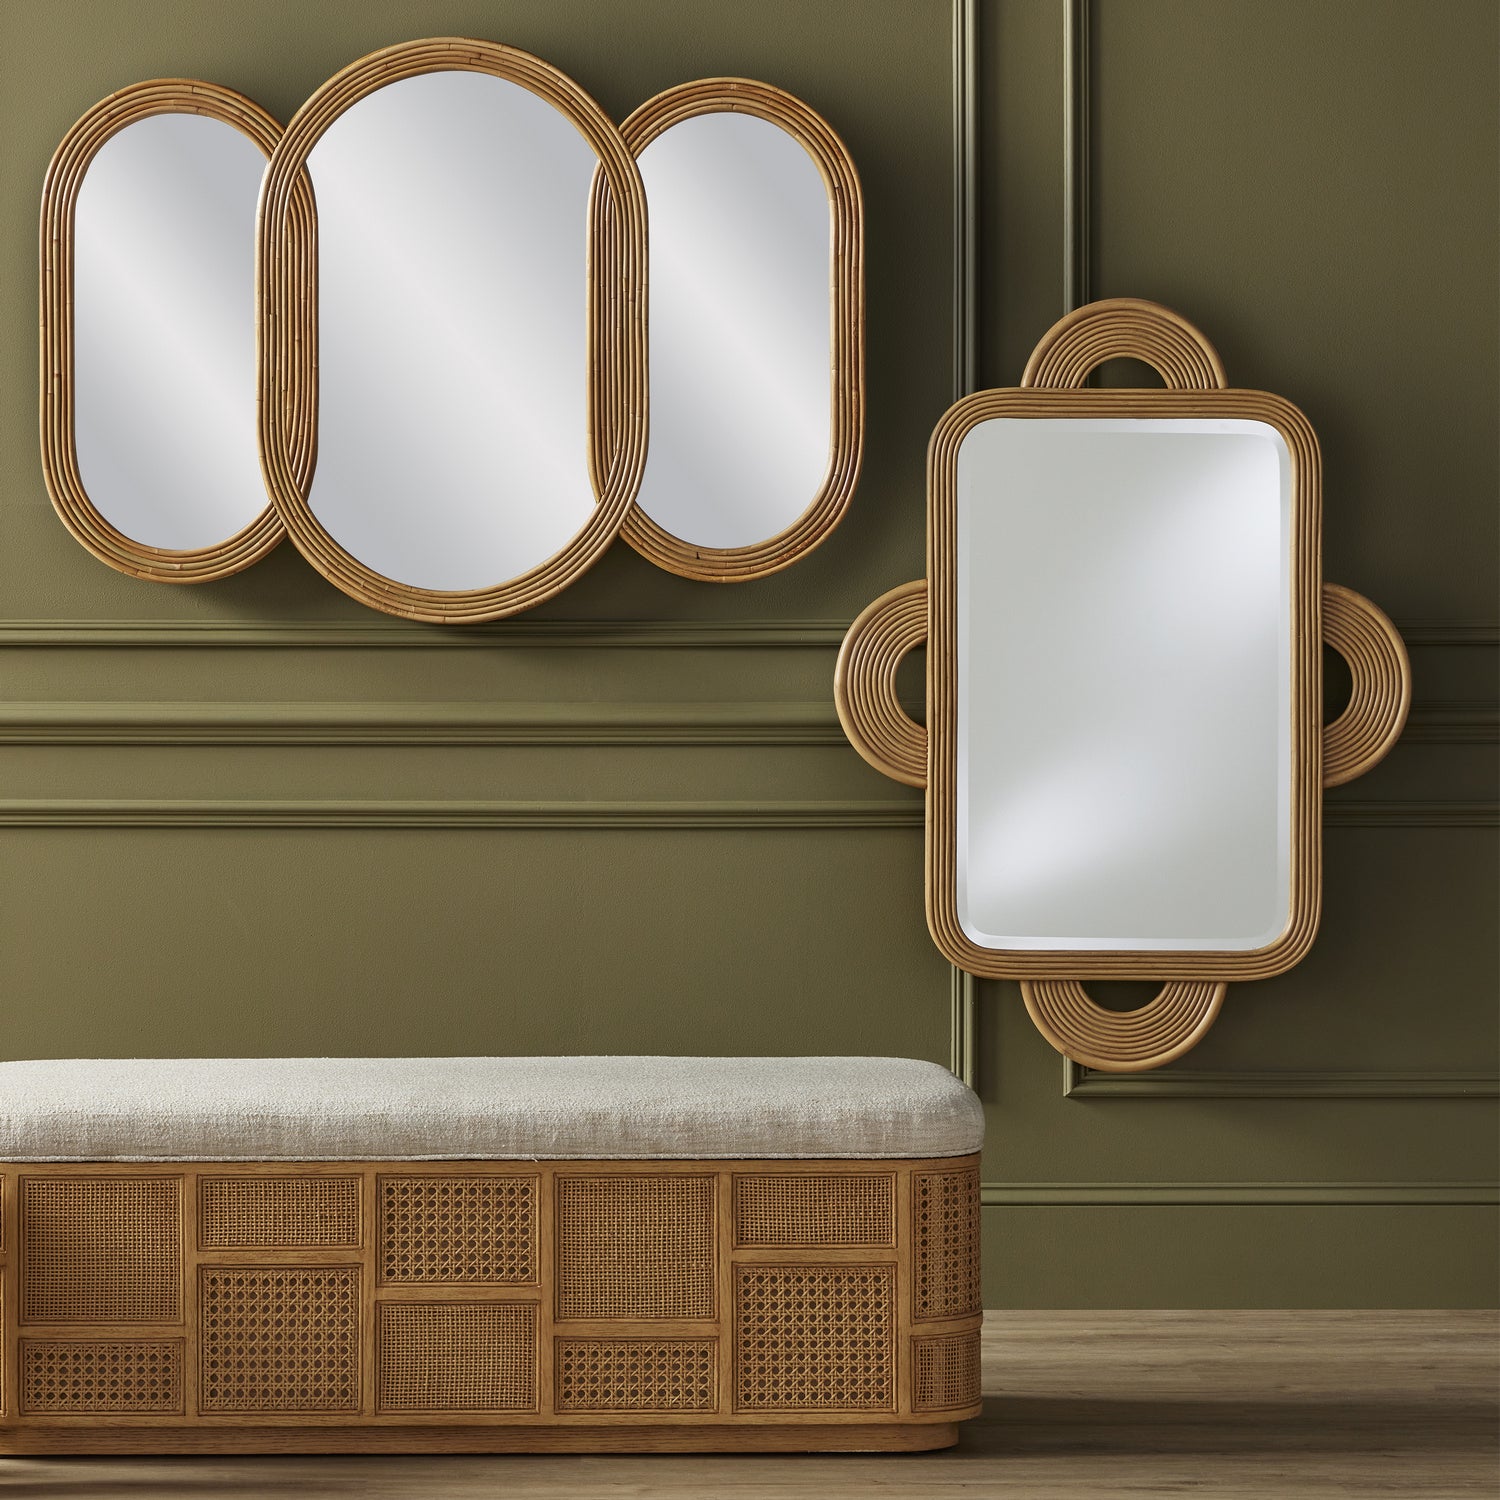 Mirror from the Triboa collection in Arurog/Khaki/Mirror finish